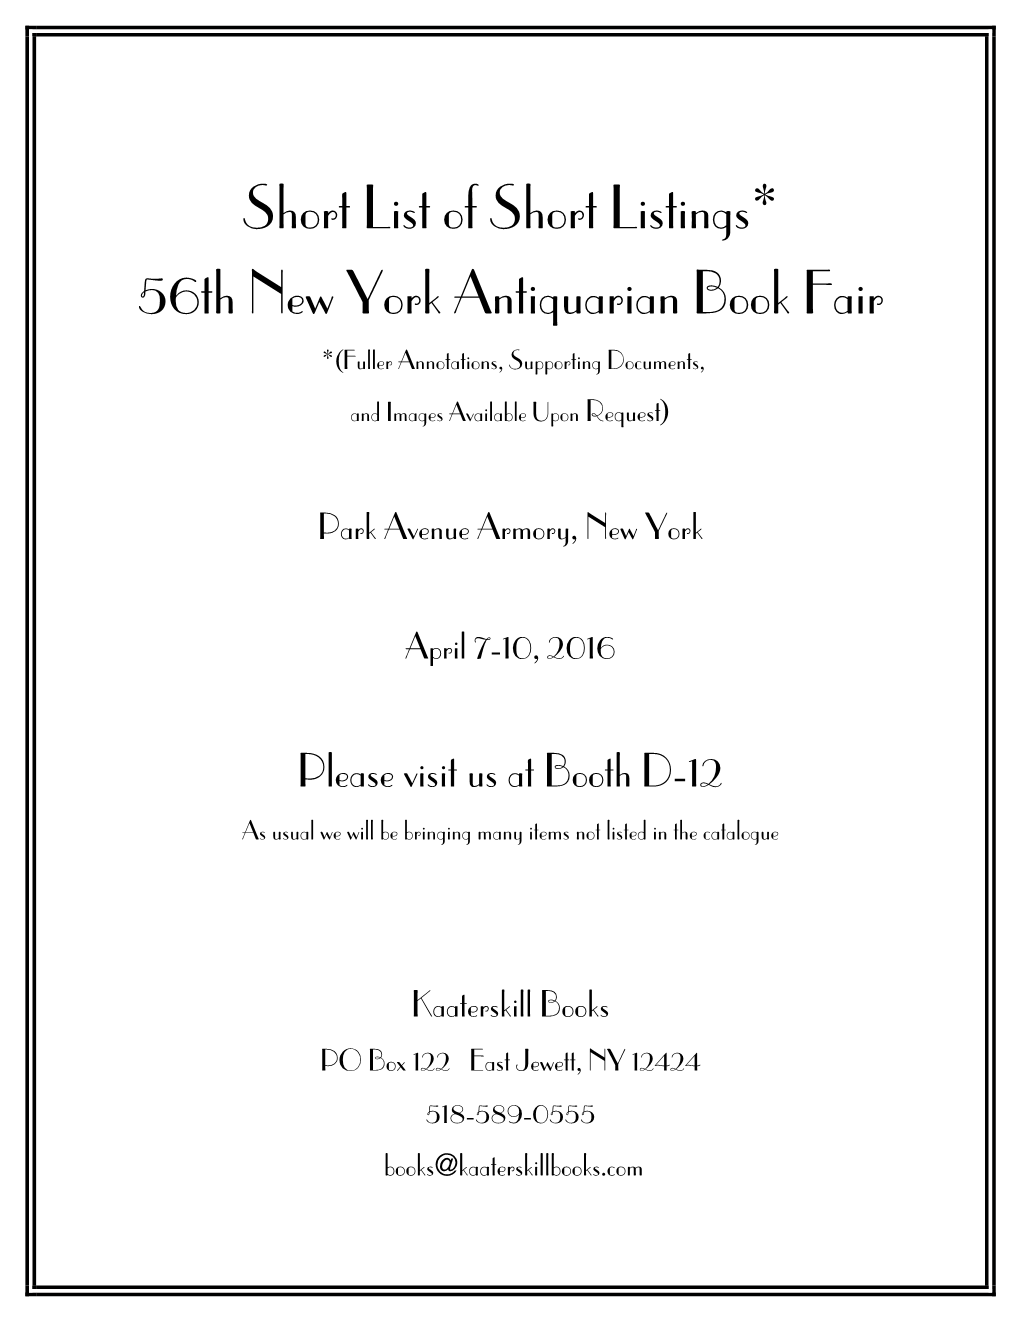 Short List of Short Listings* 56Th New York Antiquarian Book Fair *(Fuller Annotations, Supporting Documents, and Images Available Upon Request)